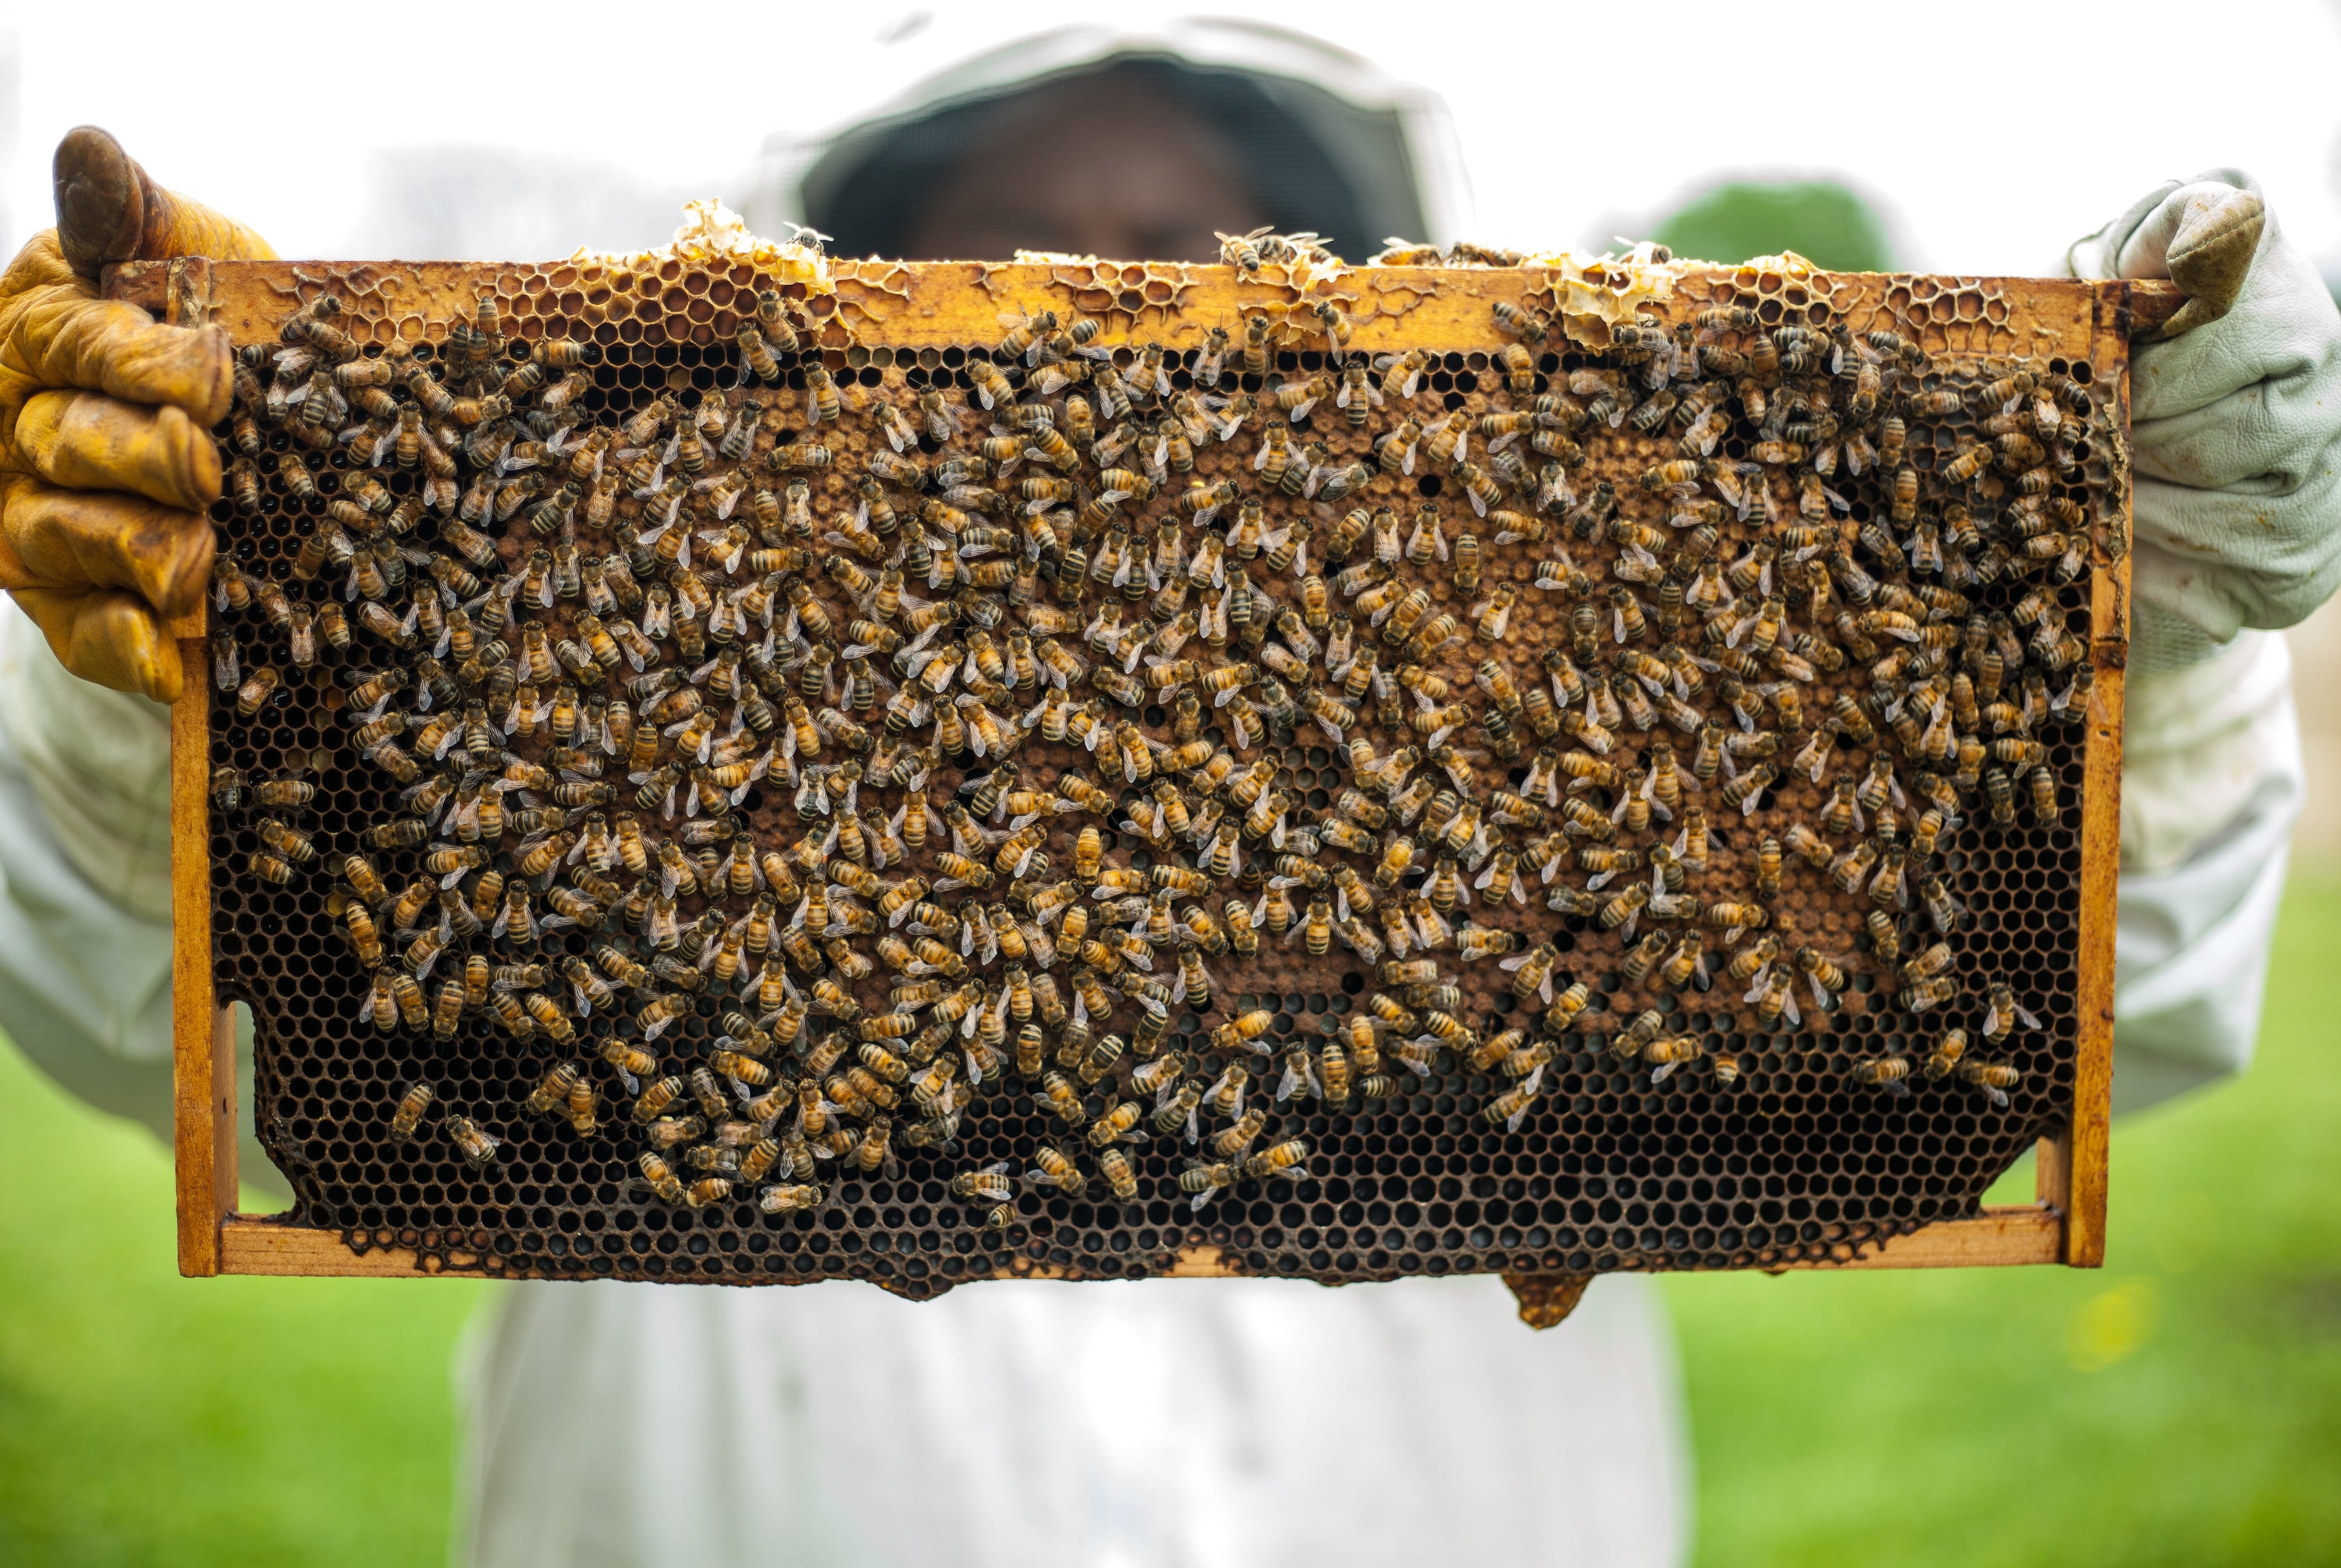 Sustainable Bees Wax supports the future of our agriculture